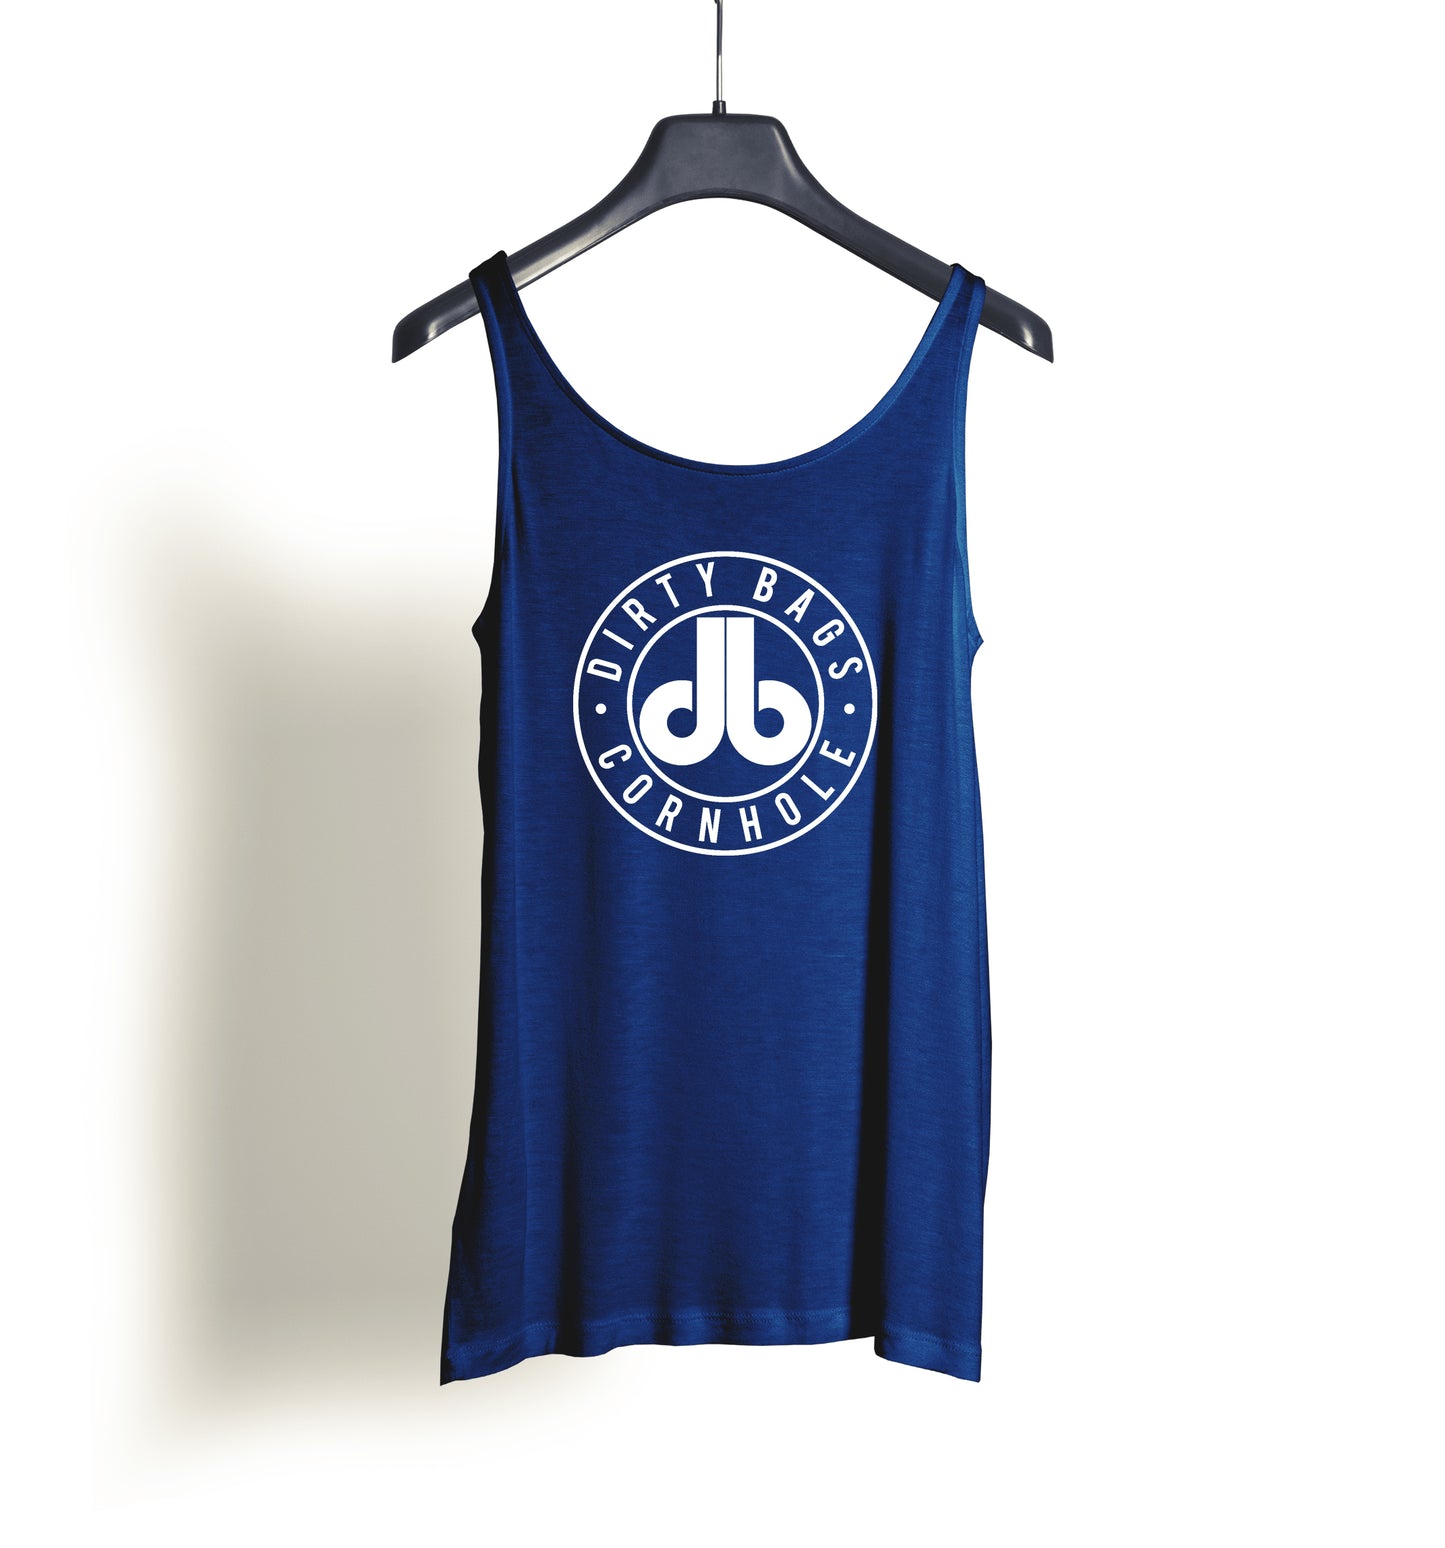 Women's Tank Top - Blue with White db